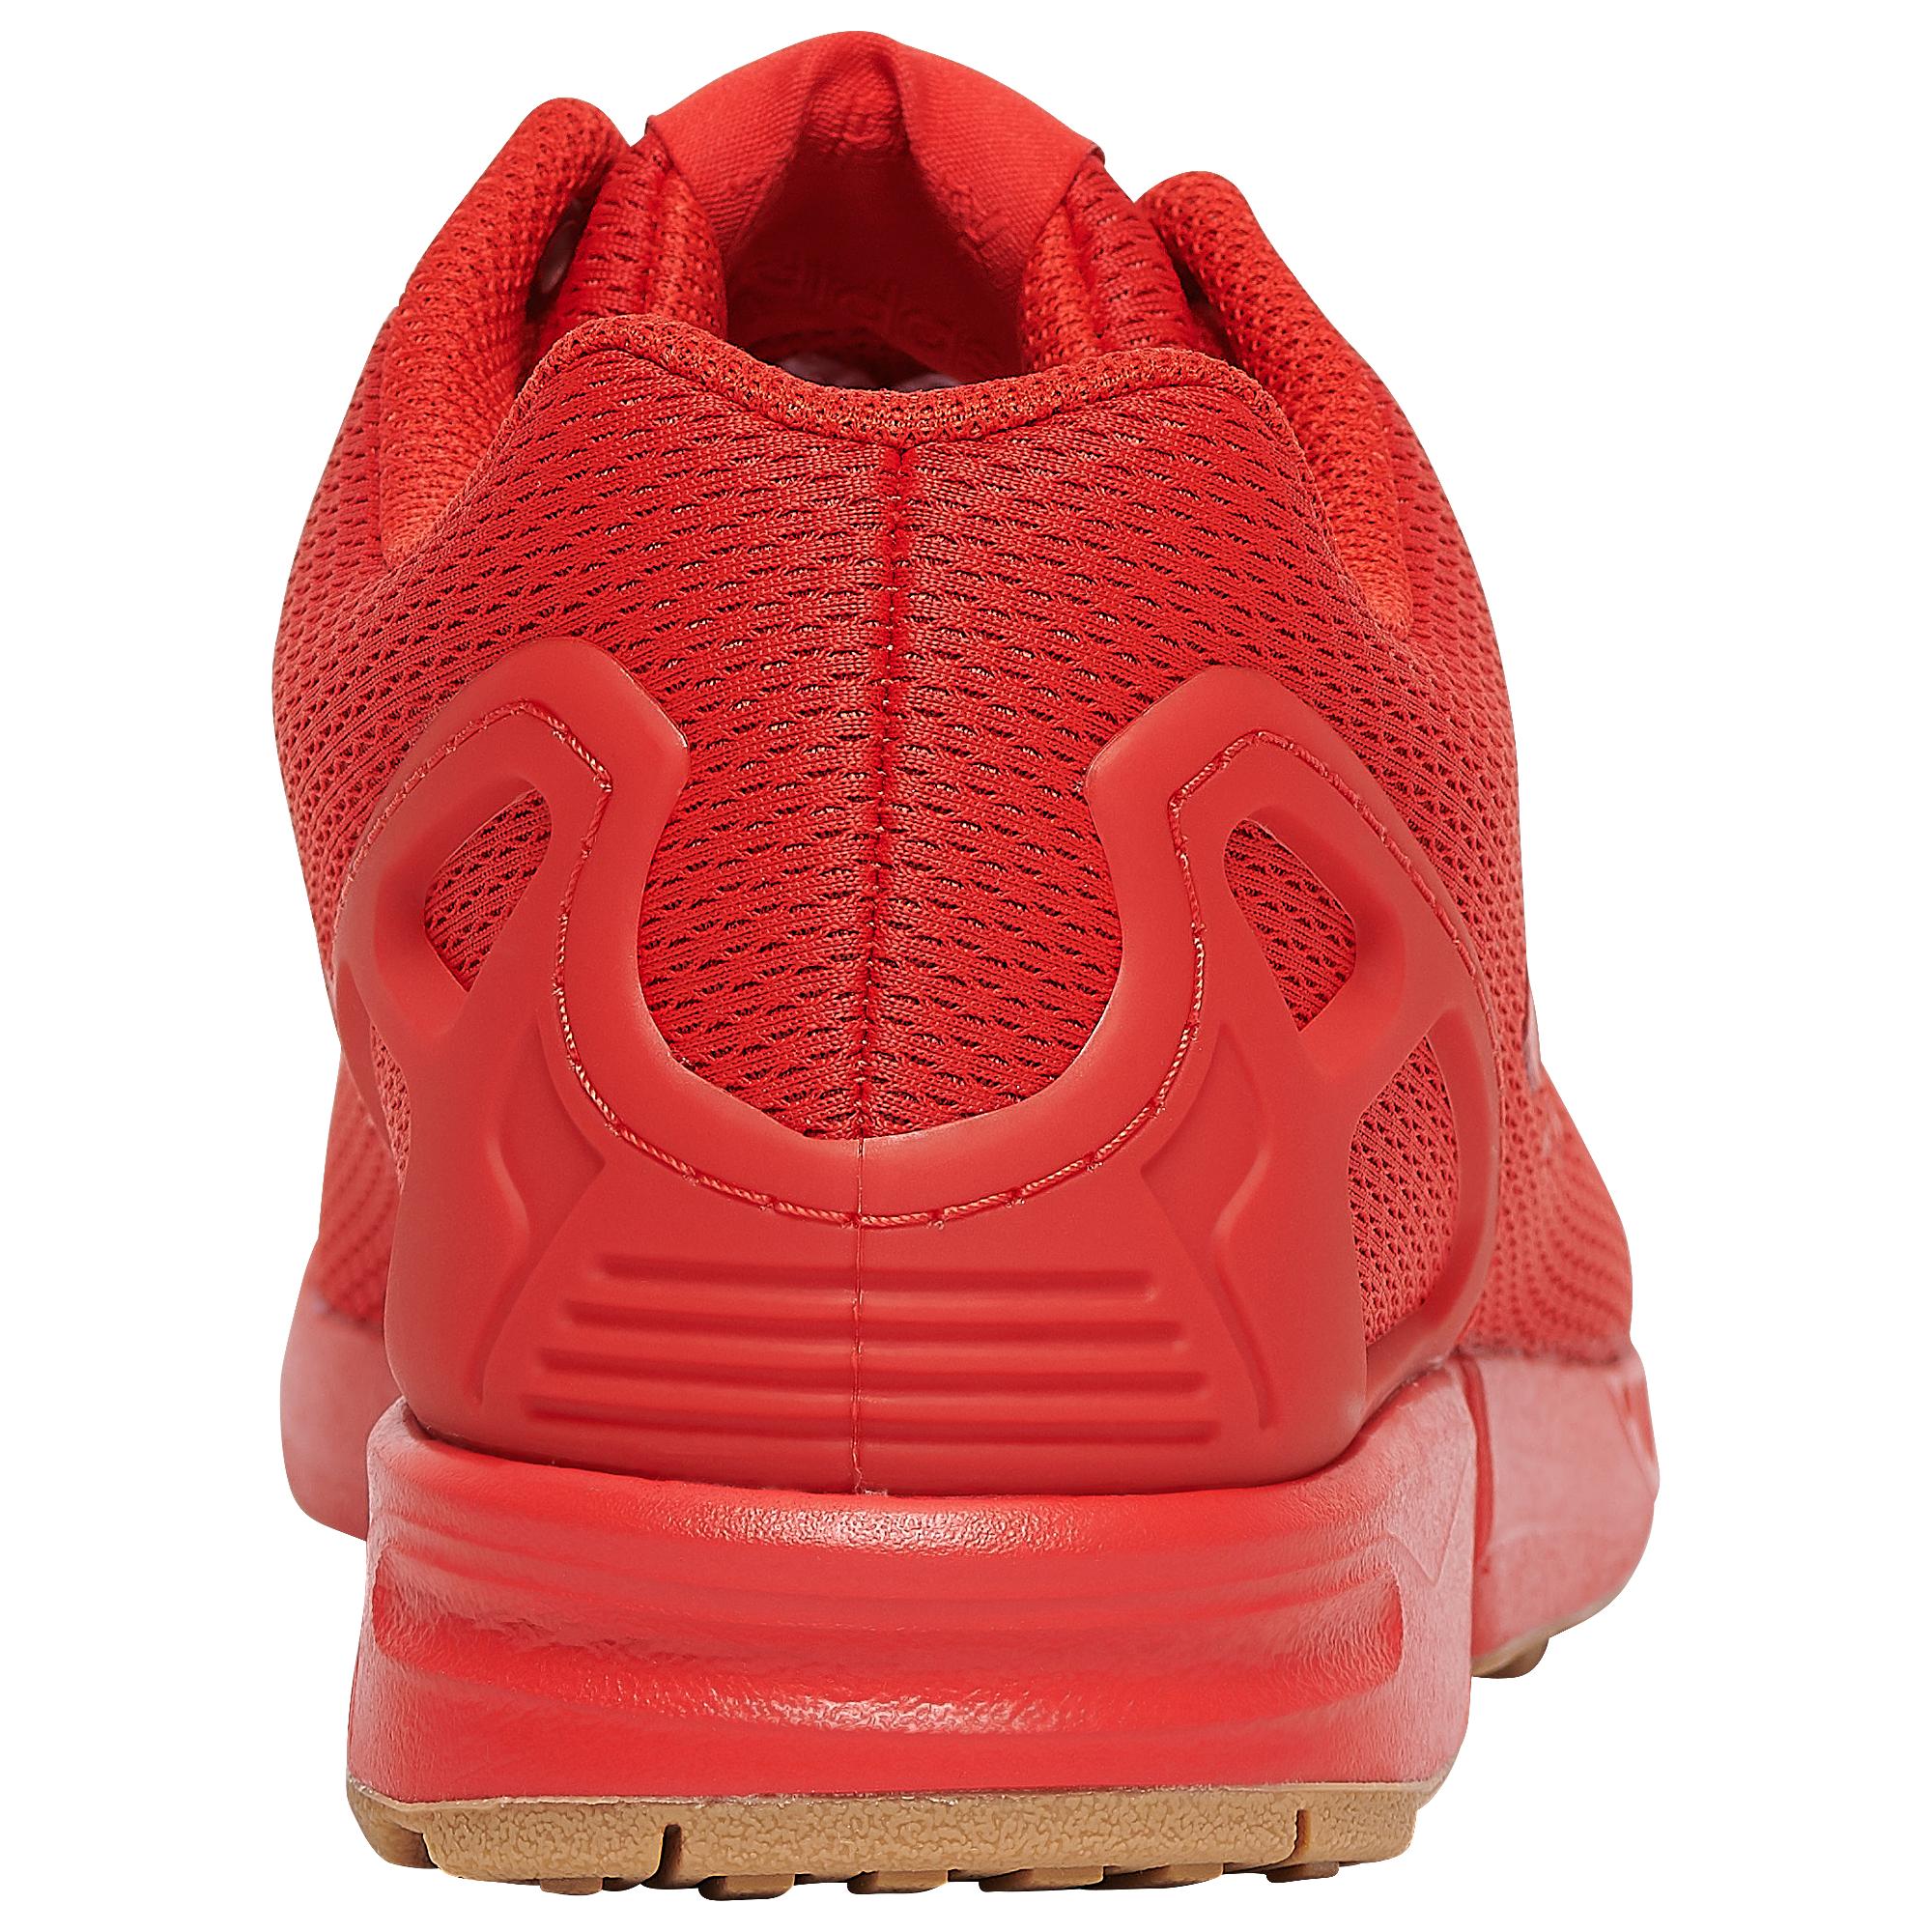 adidas Originals Rubber Zx Flux - Running Shoes in Red/Red/Red (Red) for  Men - Save 27% - Lyst